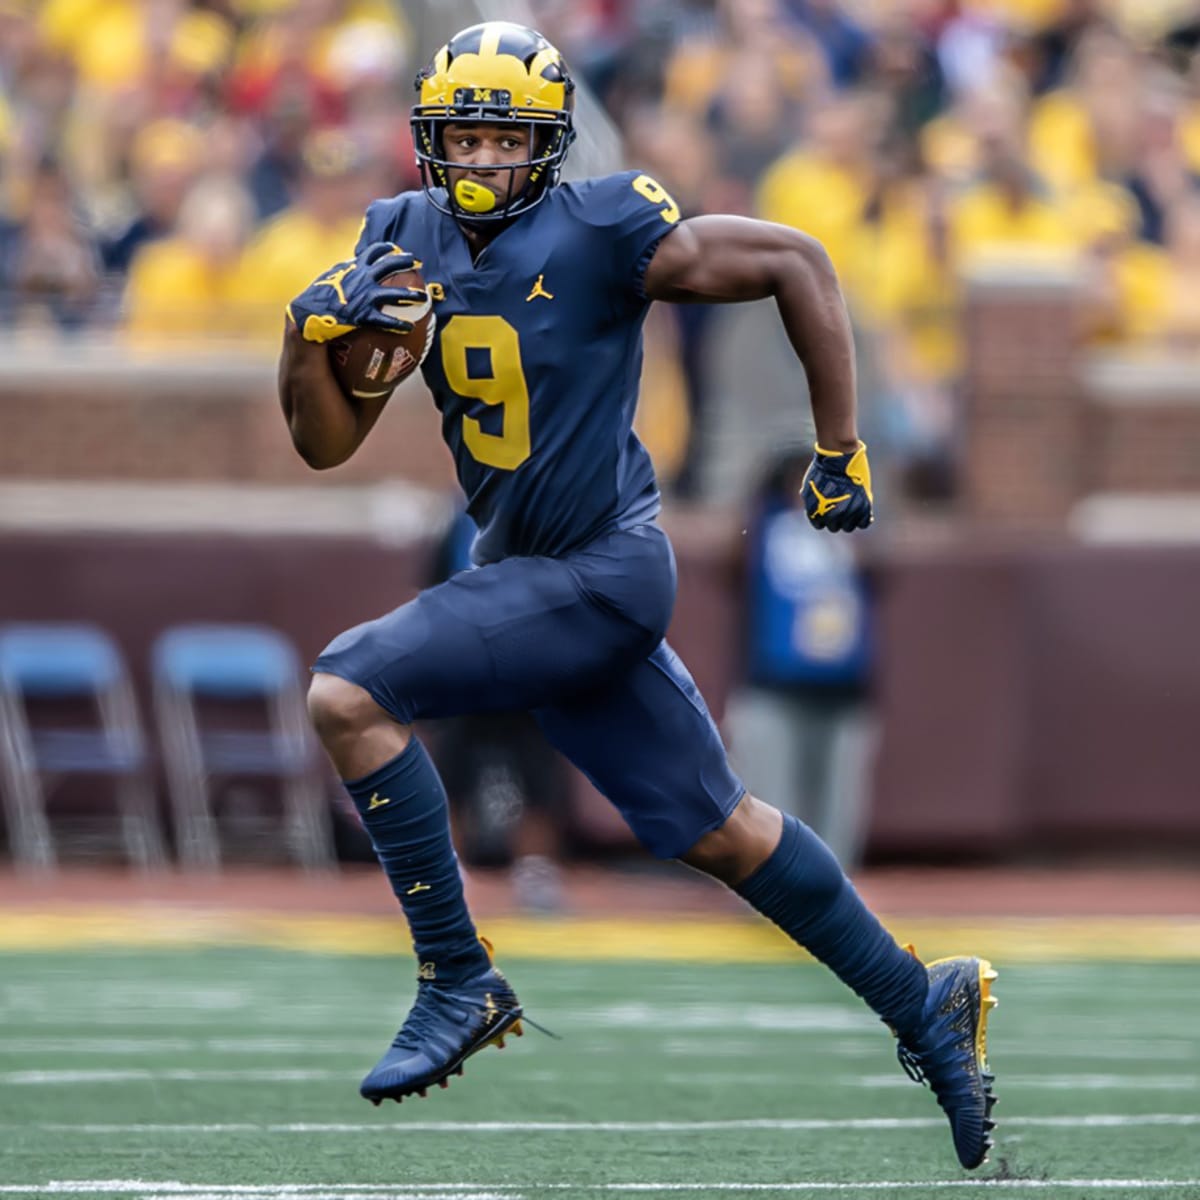 Five Thoughts On Altering Michigan's Uniforms - Sports Illustrated